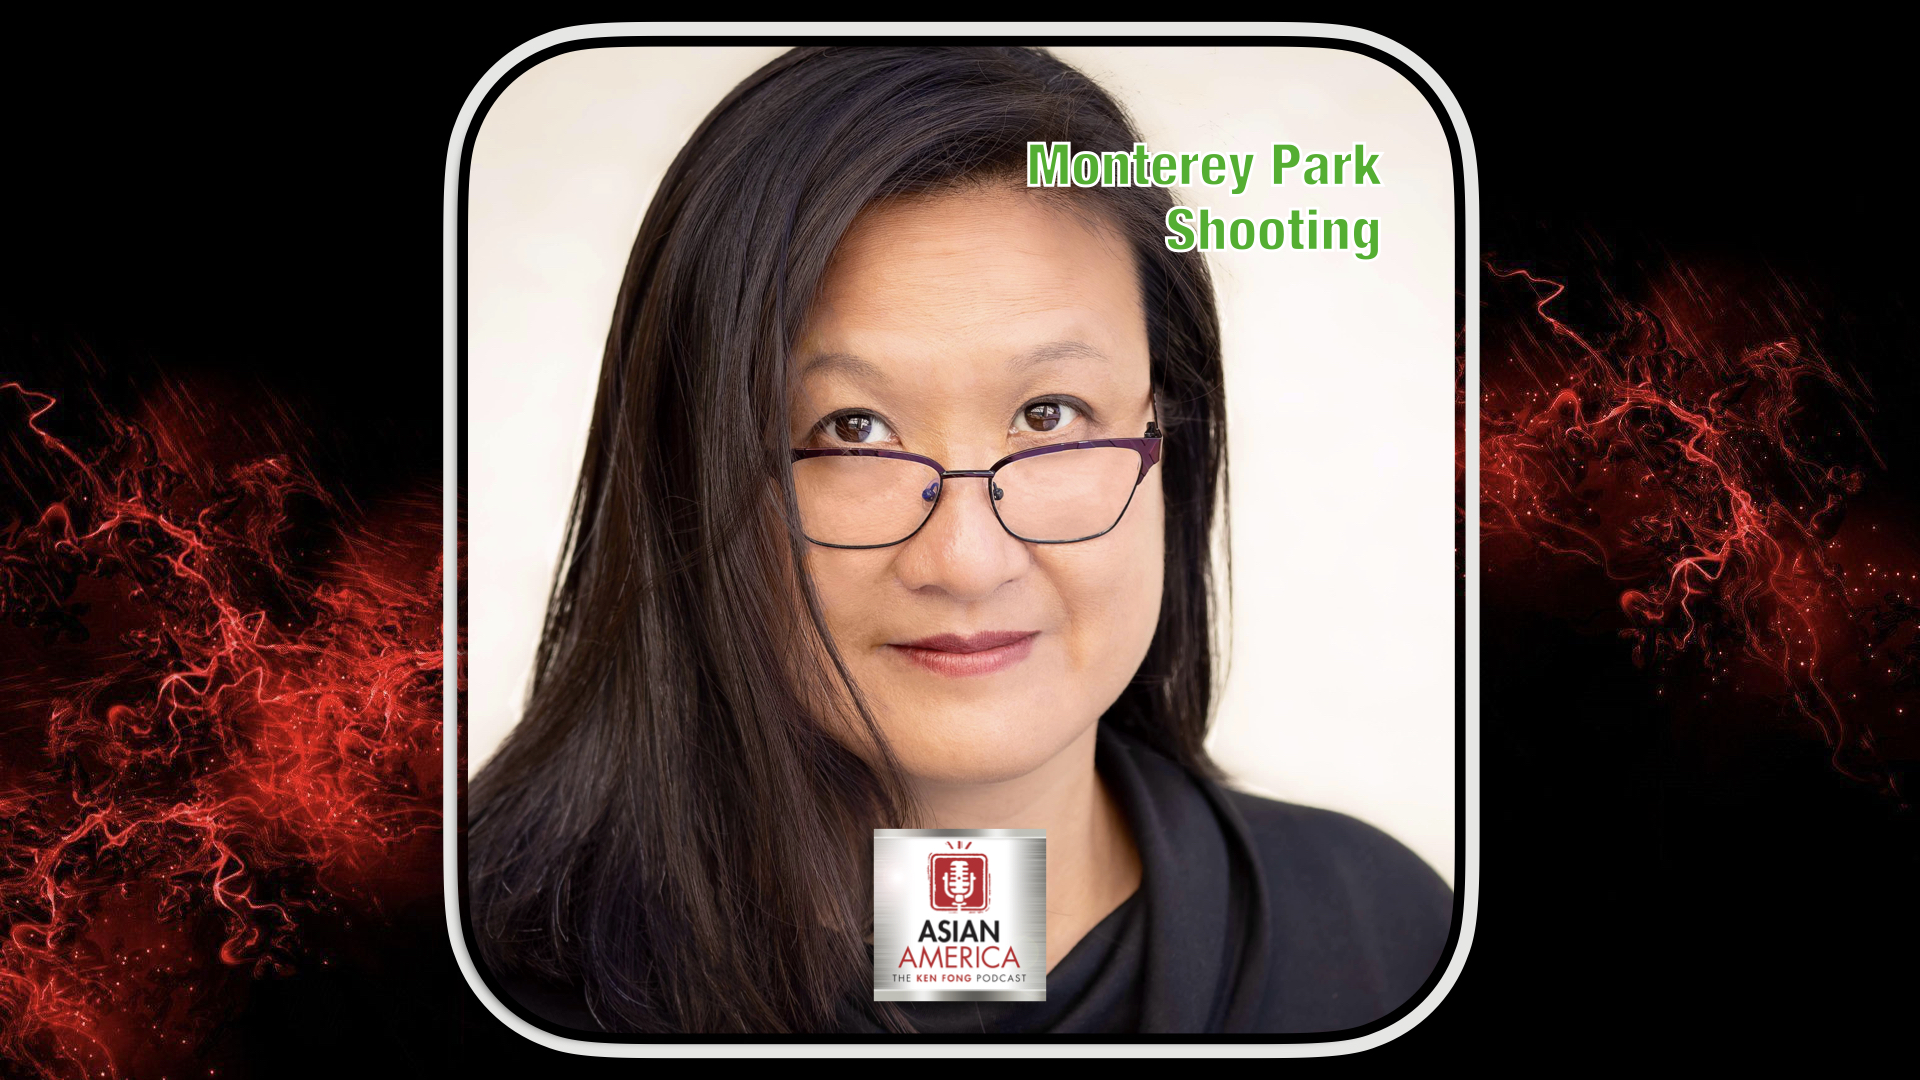 Ep 409: Dr. Jennifer Ho On Assimilating America’s Culture of Gun Violence, Toxic Masculinity, and White Supremacy